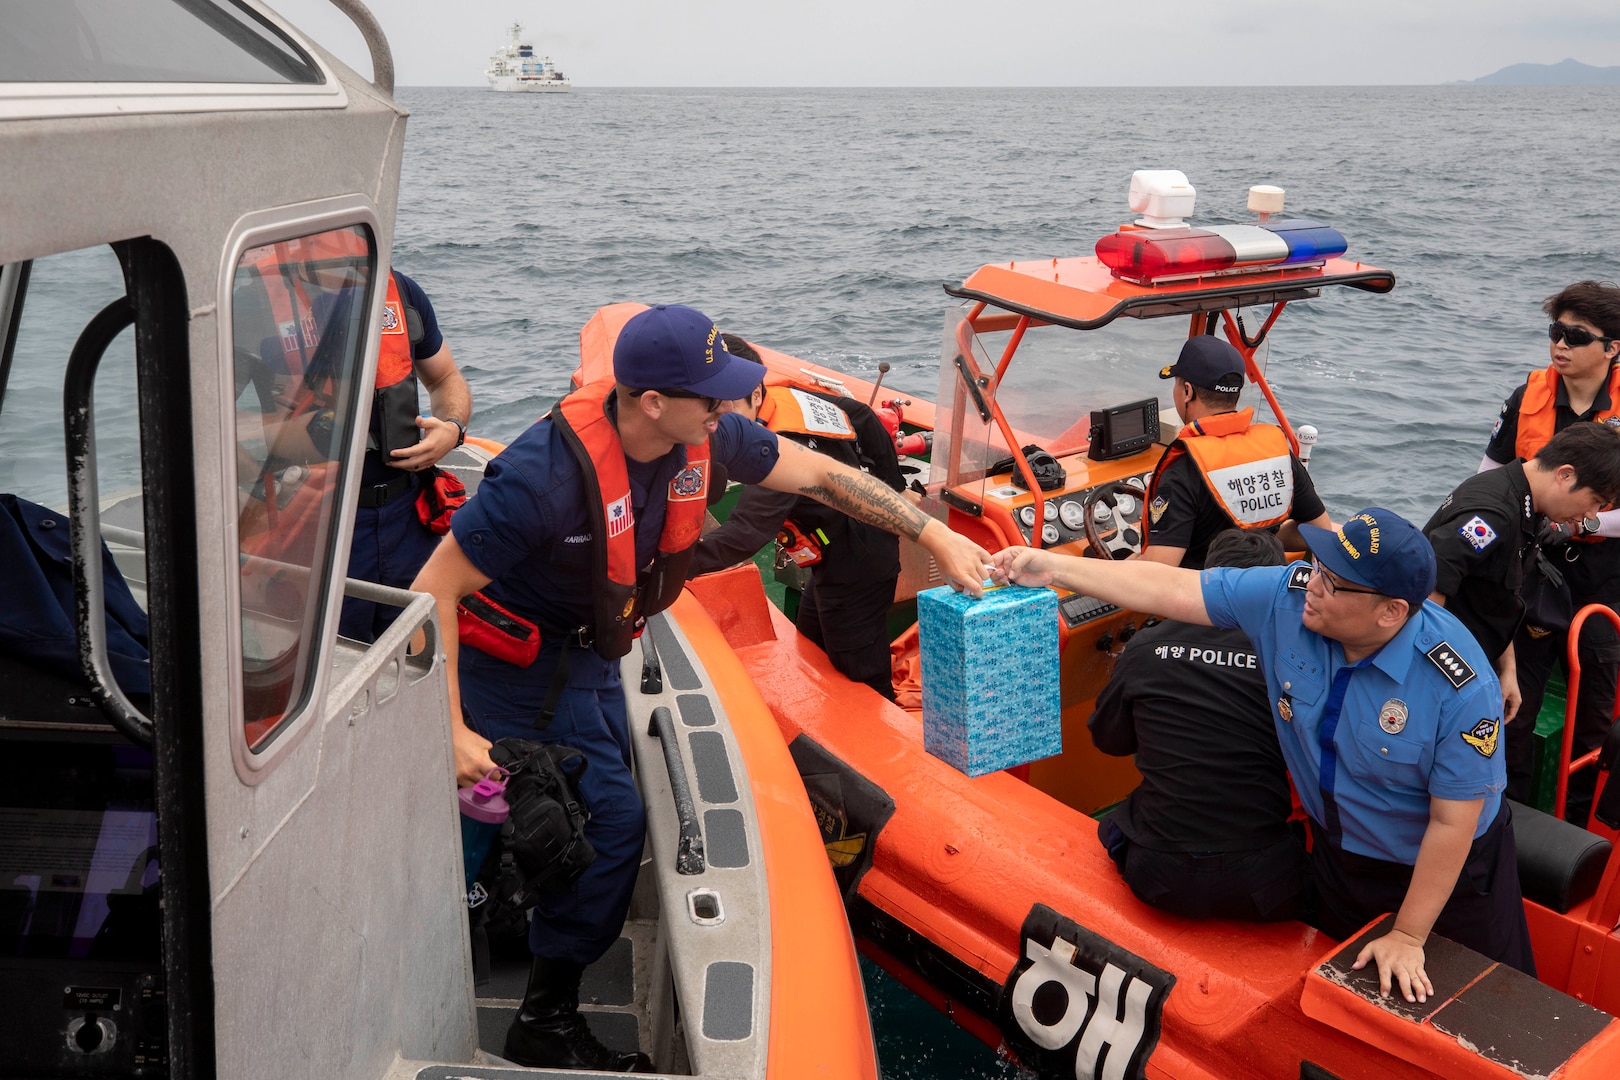 Assistant Inspector Lim SiYong (right) passes a gift to Petty Officer 2nd Class Samuel Zarraonandia at the conclusion of an at-sea engagement between U.S. Coast Guard Cutter Munro (WMSL 755) and Korea Coast Guard vessel KCG 3011 (Badaro) in the Tsushima Strait Aug. 16, 2023. Munro is deployed to the Indo-Pacific to advance relationships with ally and partner nations to build a more stable, free, open, and resilient region with unrestricted, lawful access to the maritime commons. (U.S. Navy photo by Chief Petty Officer Brett Cote)